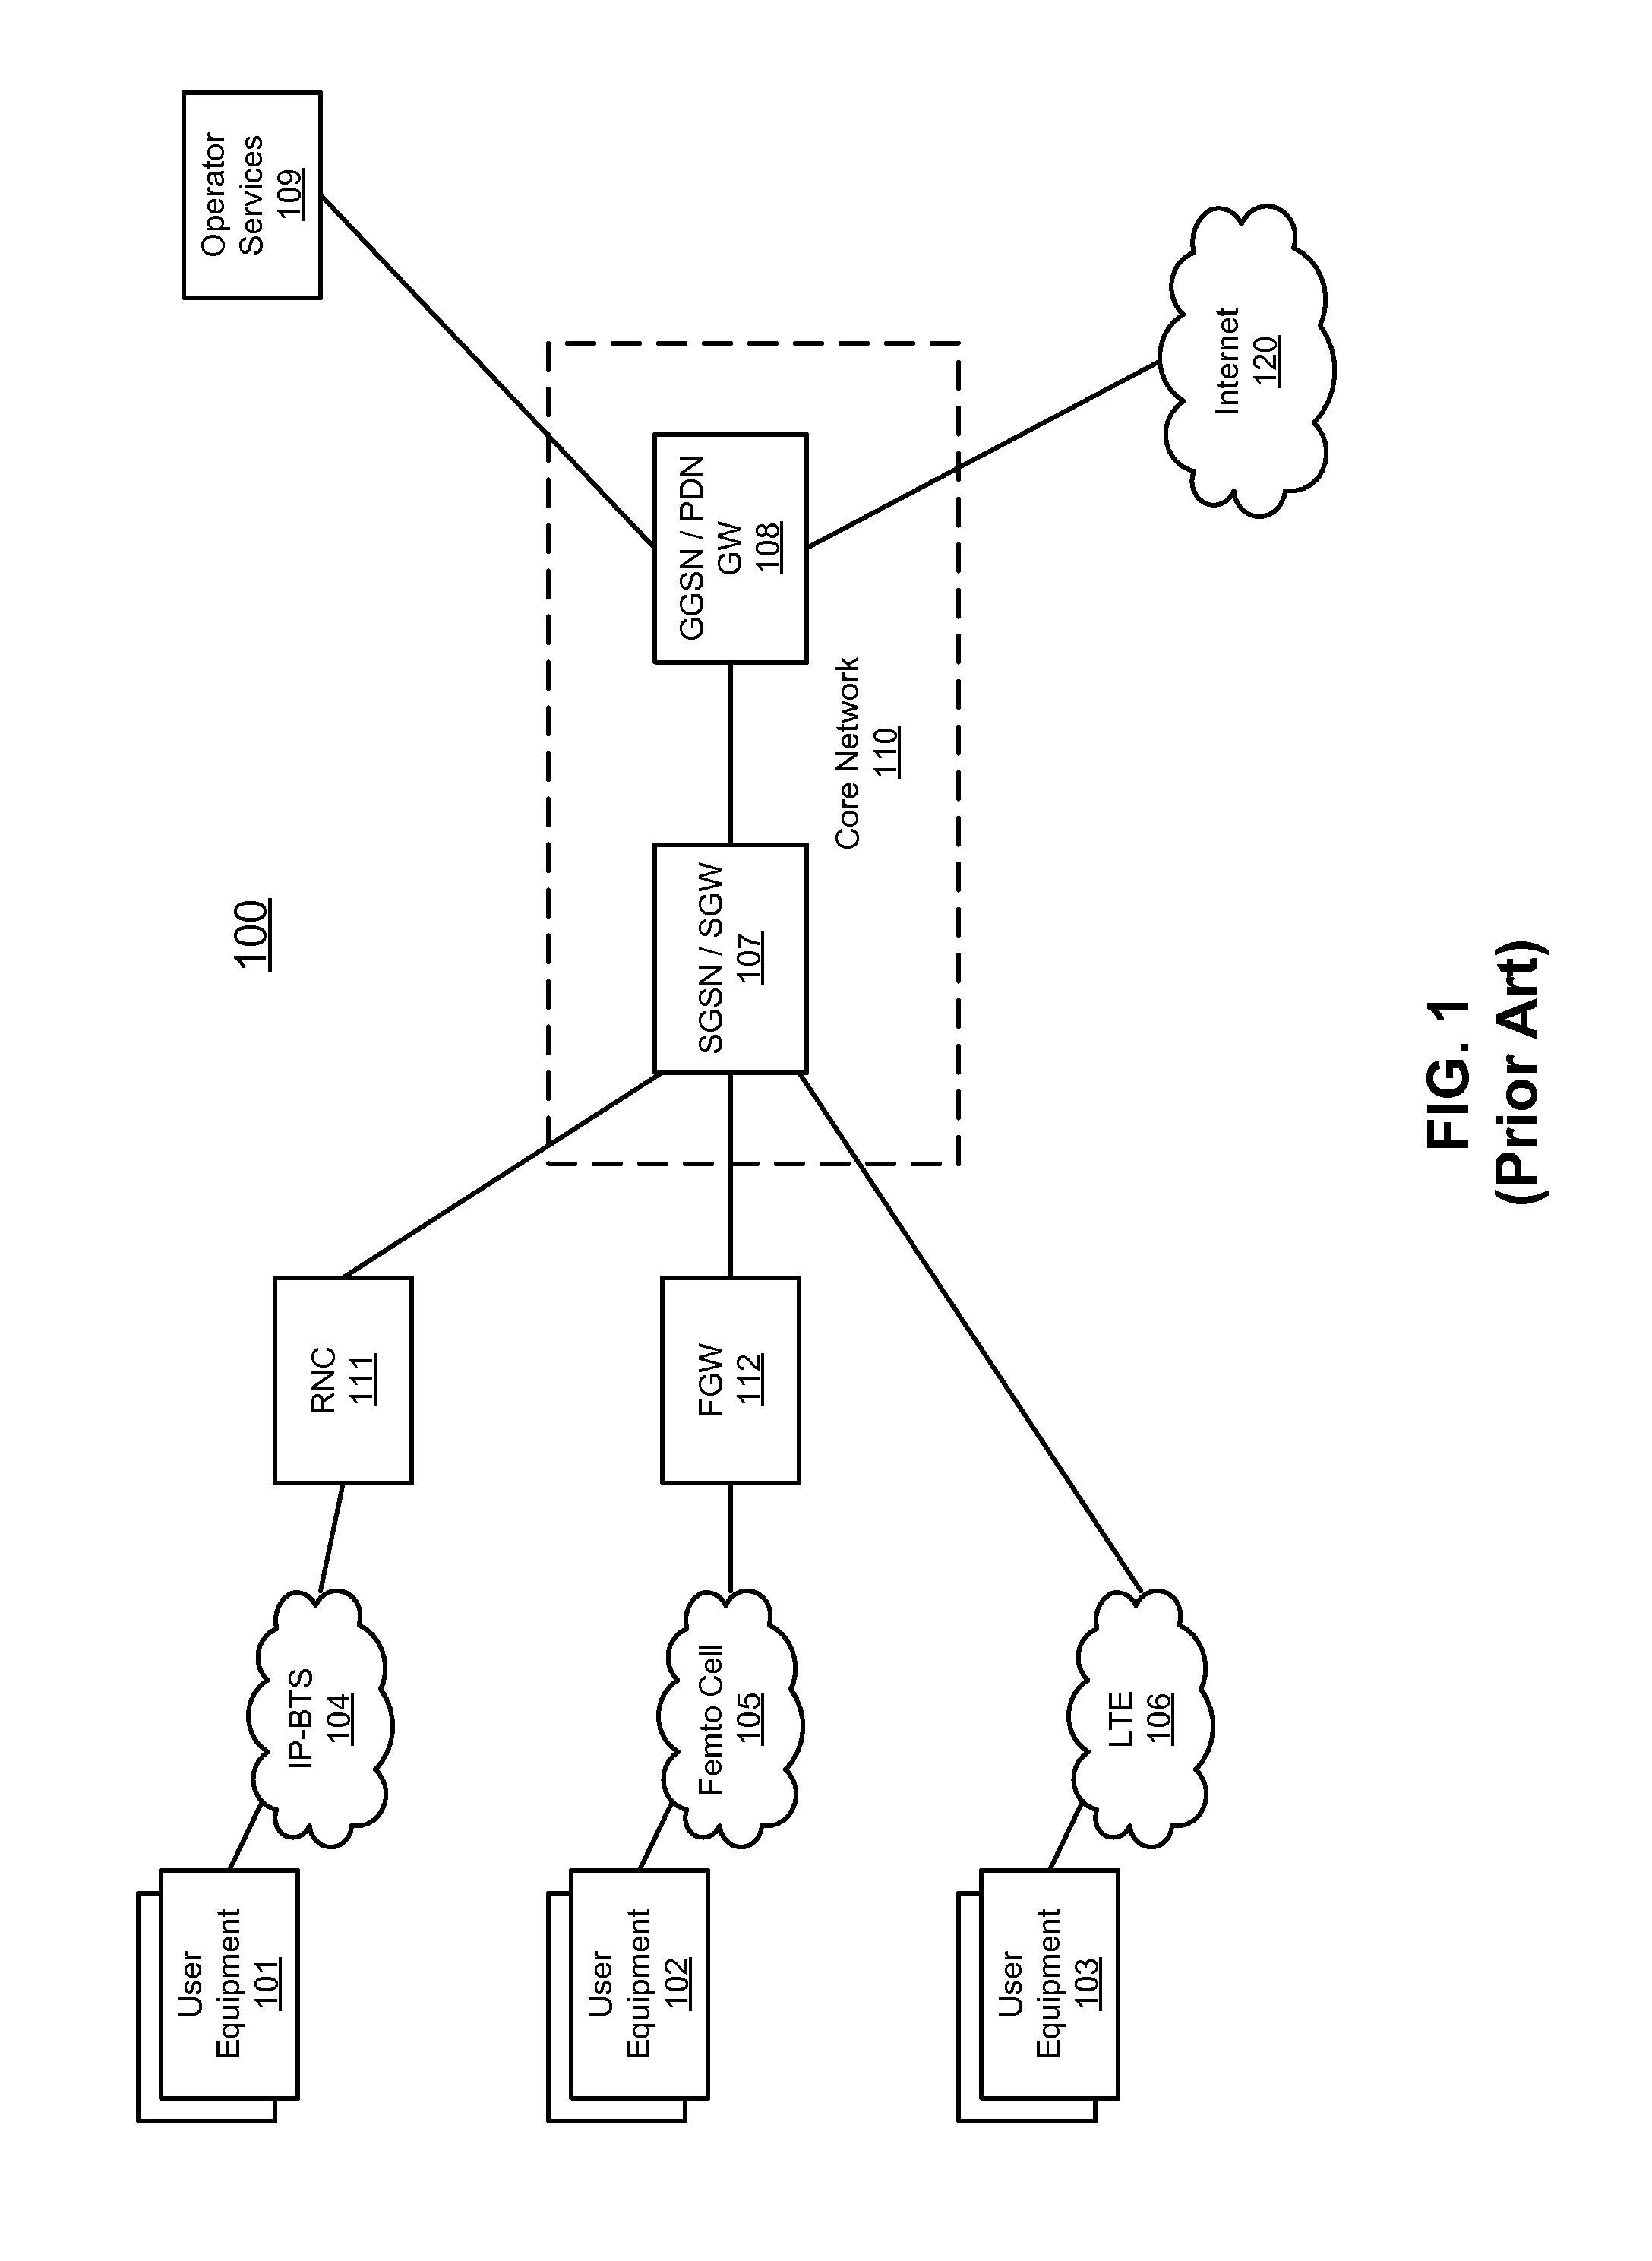 Method and system for bypassing 3GPP packet switched core network when accessing internet from 3GPP UEs using IP-BTS, femto cell, or LTE access network